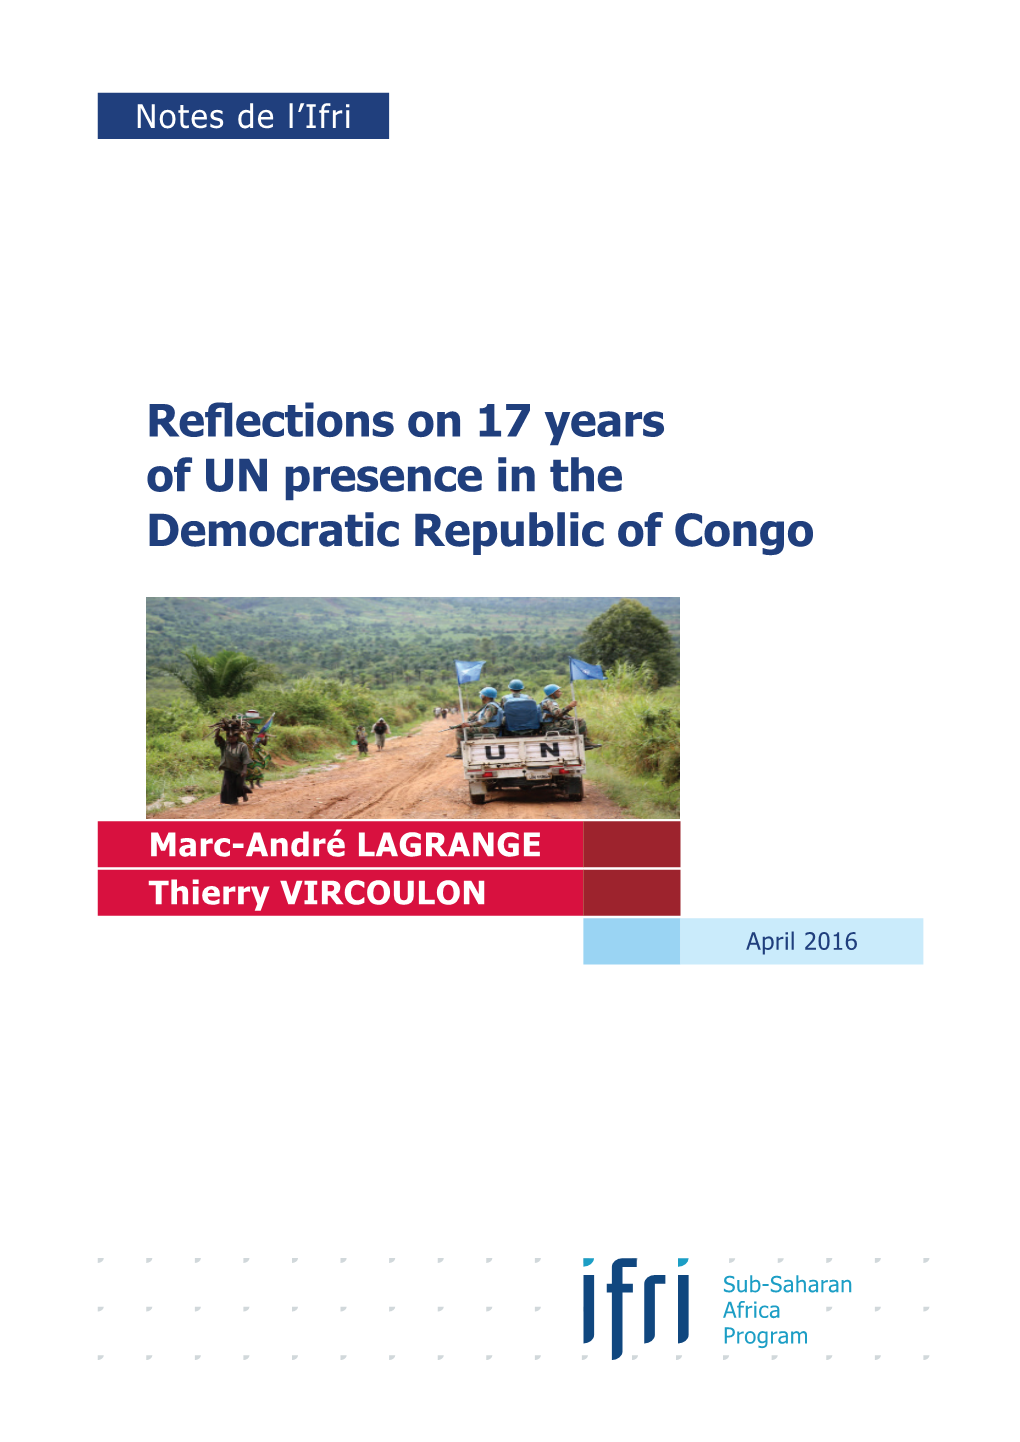 Reflections on 17 Years of UN Presence in the Democratic Republic of Congo